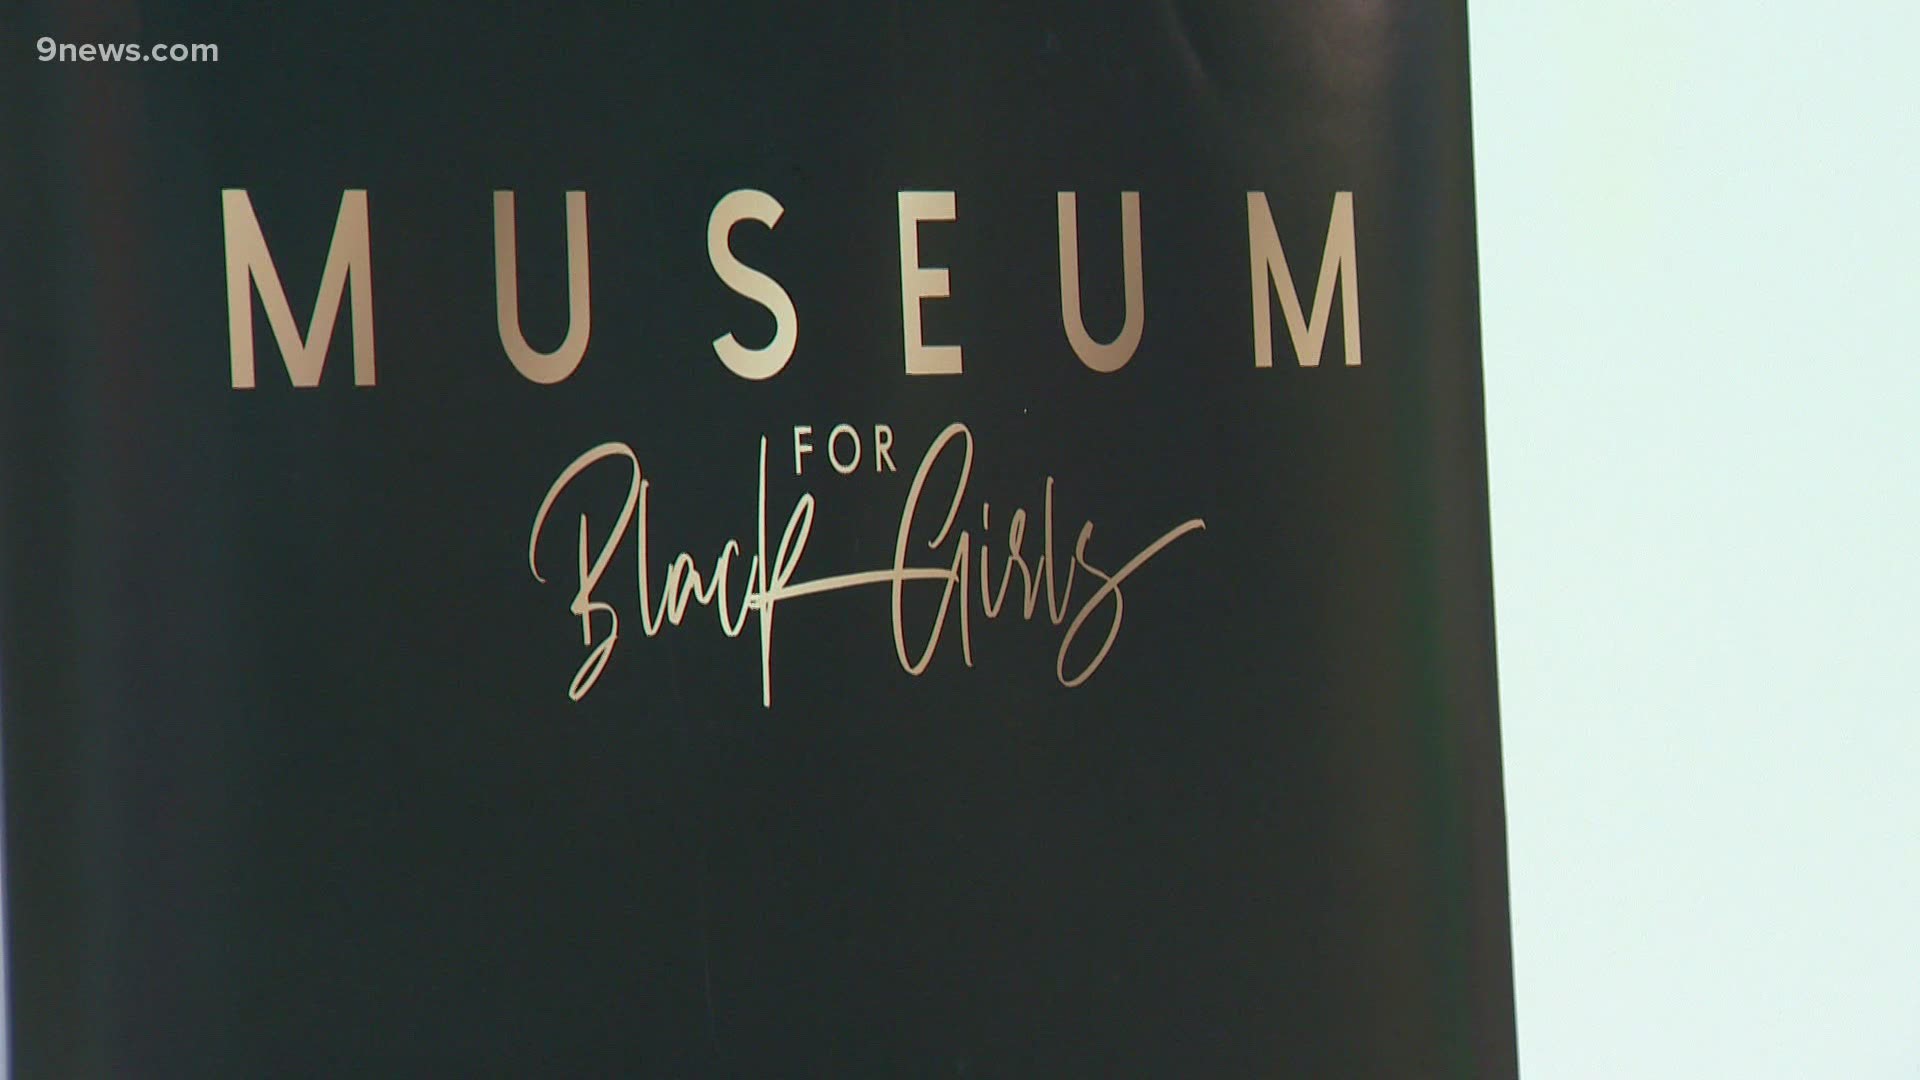 A pop-up museum that was inspired by owner Charlie Billingsley's experiences of growing up as a Black woman.